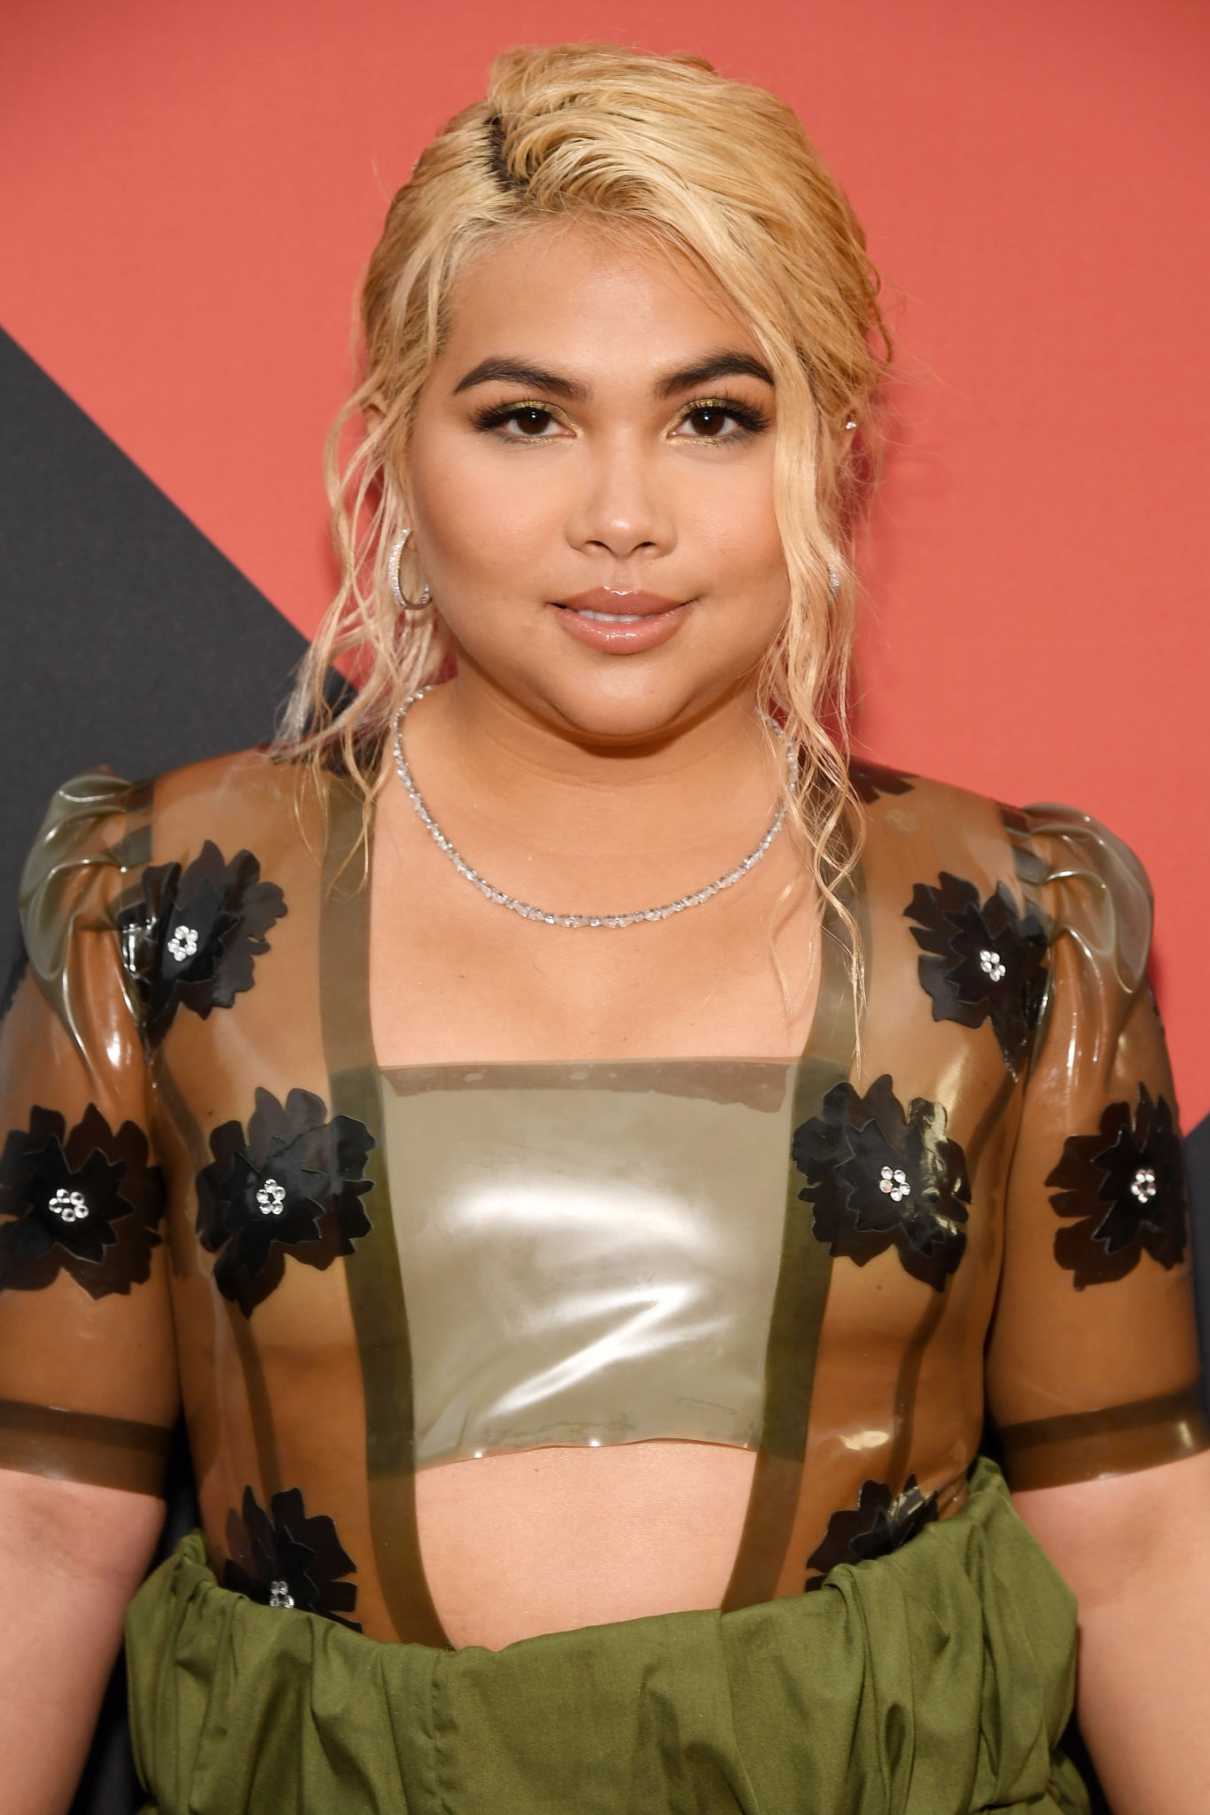 Hayley Kiyoko Attends the 2019 MTV Video Music Awards at Prudential